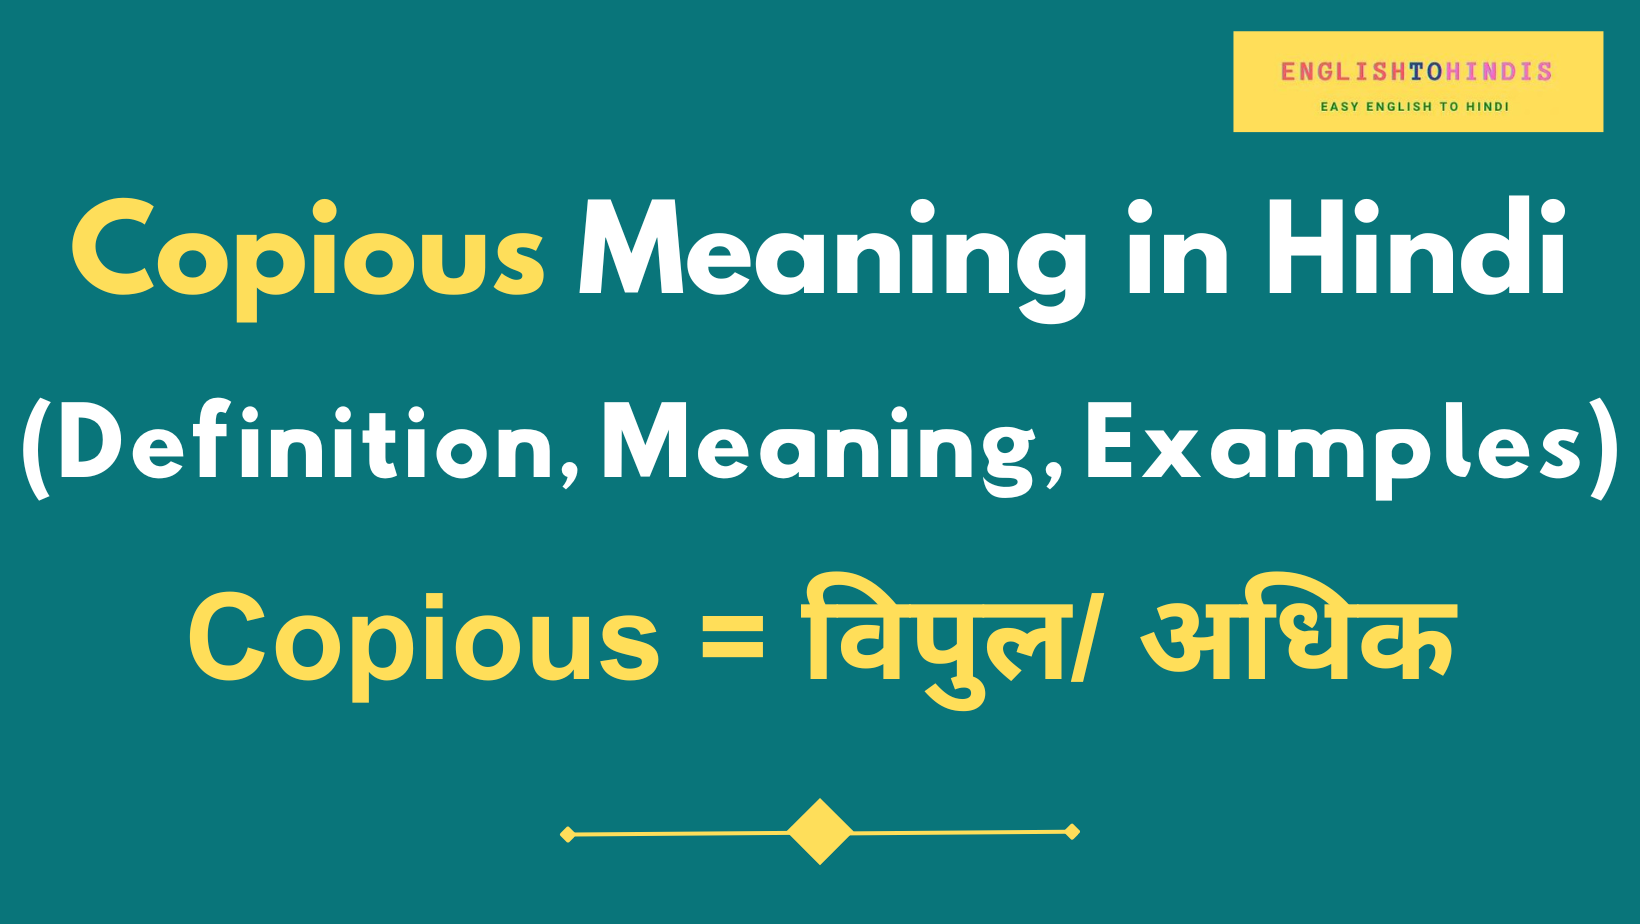 Copious Meaning in Hindi